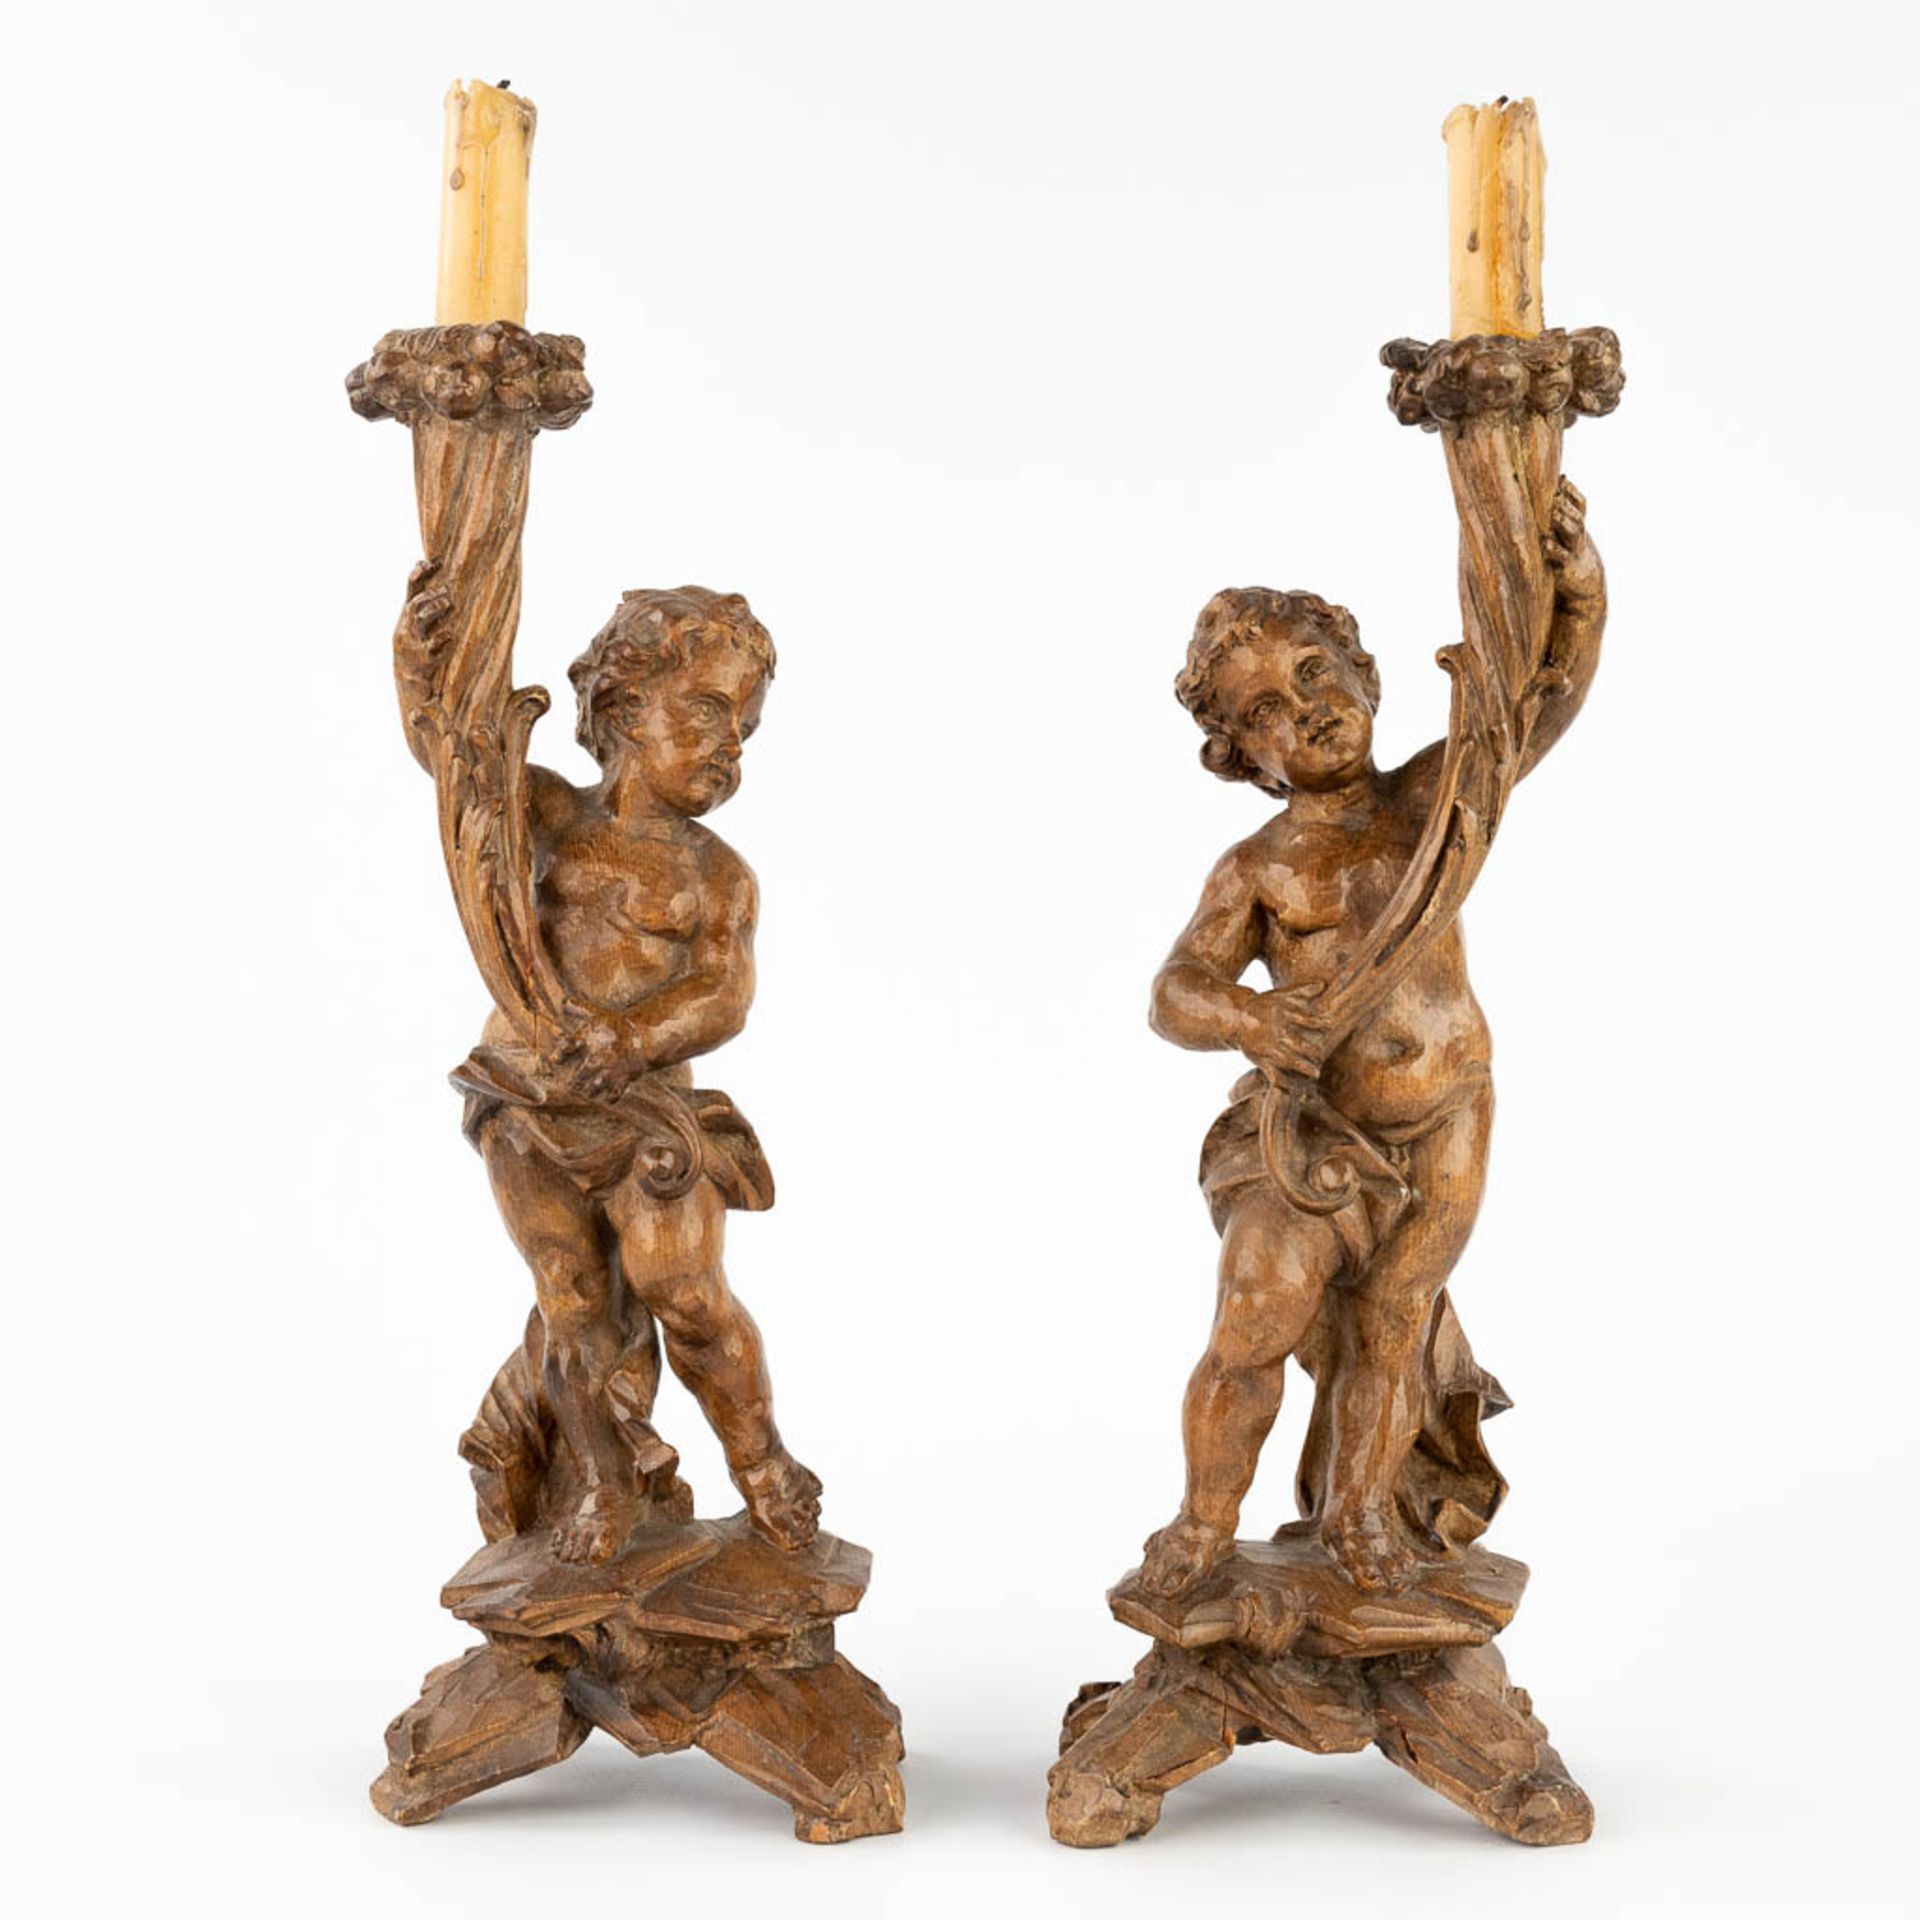 A pair of wood-sculptured candle holders, with putti. 19th C. (L:9 x W:12 x H:34 cm)